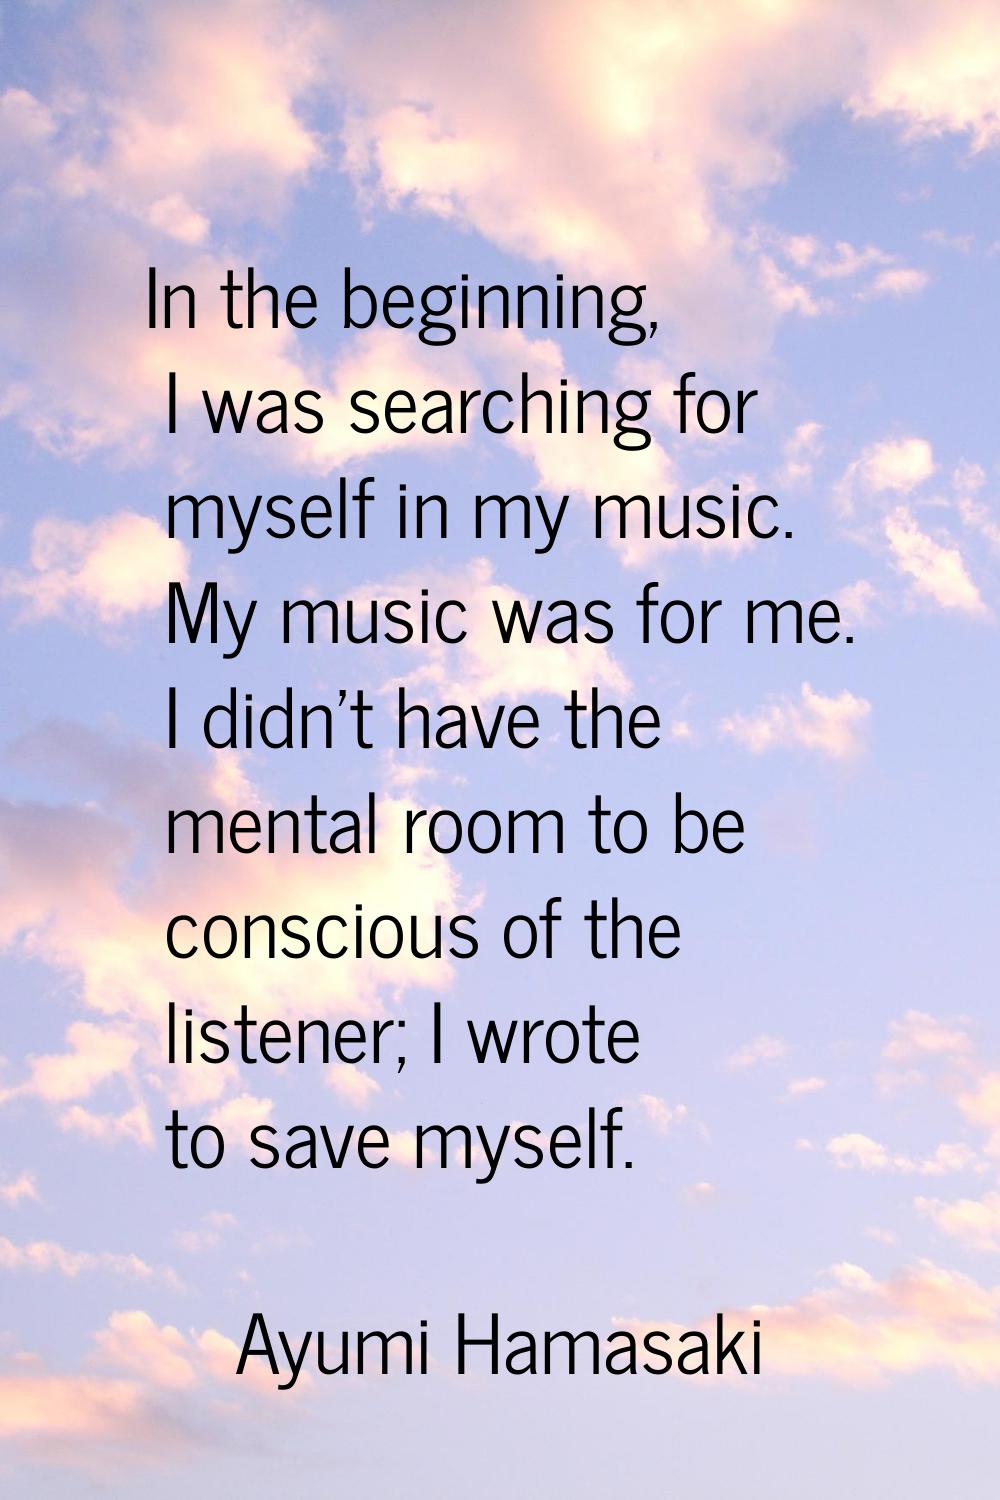 In the beginning, I was searching for myself in my music. My music was for me. I didn't have the me